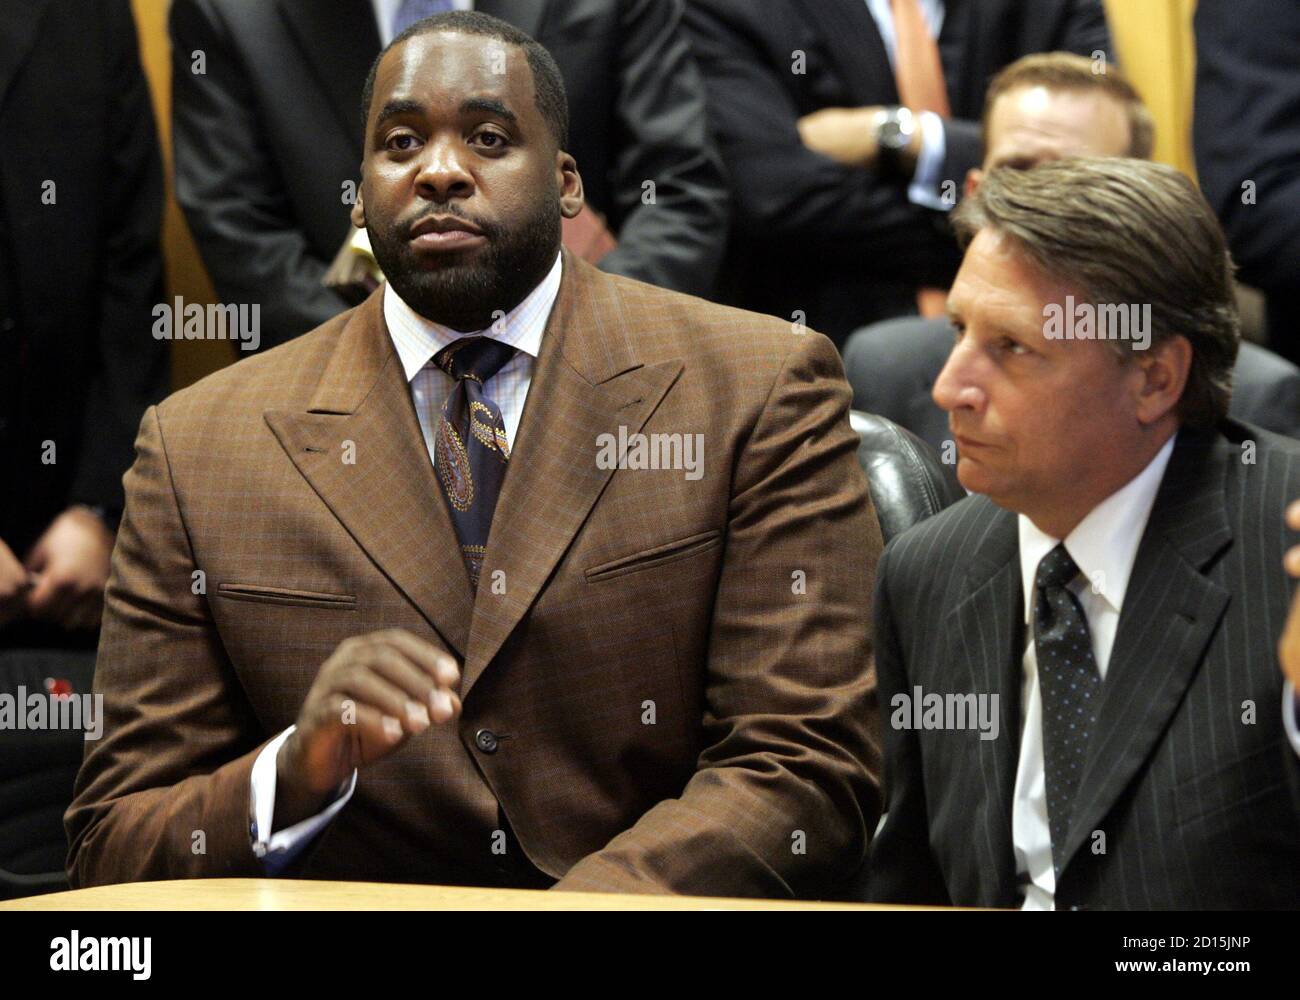 Detroit Mayor Kwame Kilpatrick (L) sits next to his attorney James Thomas during a hearing at Wayne County Circuit Court in Detroit, Michigan September 4, 2008. Kilpatrick pleaded guilty on Thursday to obstruction of justice in a plea agreement that will force him from office and cap a scandal that had threatened to spill over into the U.S. presidential campaign in a key battleground state.    REUTERS/Rebecca Cook   (UNITED STATES) Stock Photo